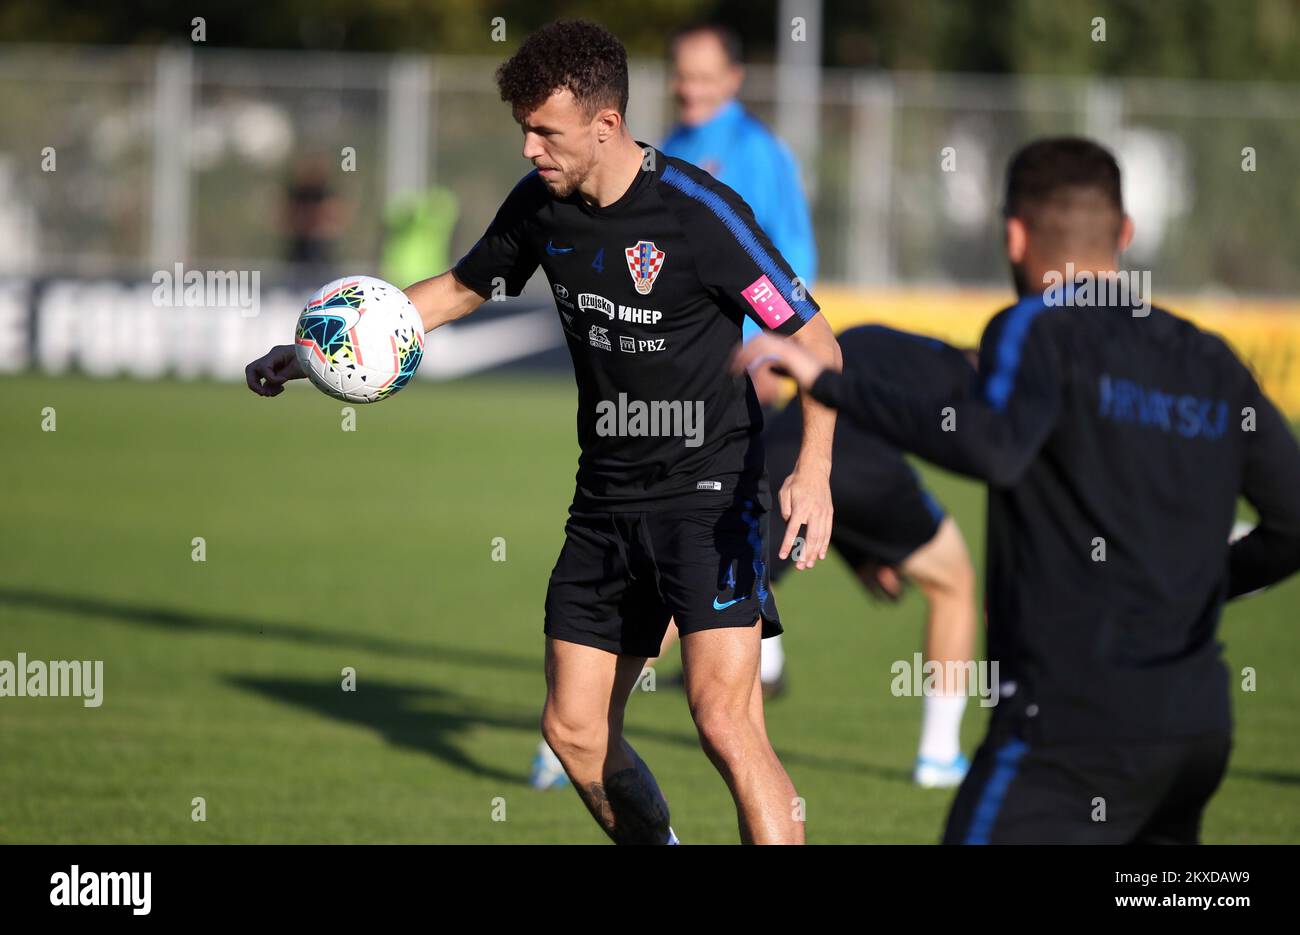 08.10.2019,Omis - Croatian national team hold second training session ahead of qualifying match for EP against Hungary. Ivan Perisic. Croatia, Omis Photo: Ivo Cagalj/PIXSELL  Stock Photo